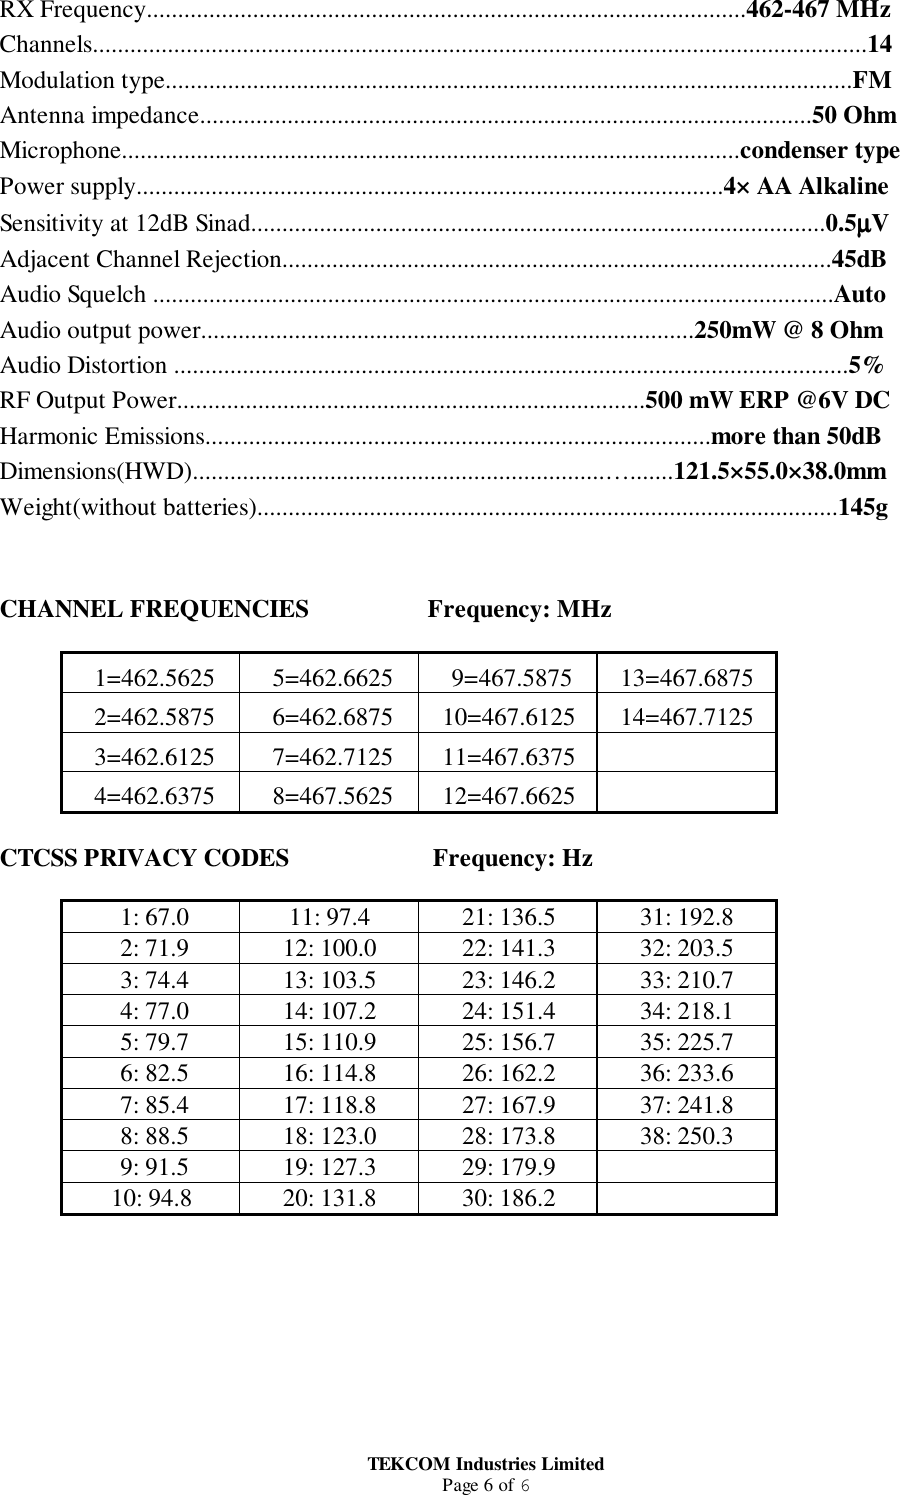 TEKCOM Industries LimitedPage 6 of 6RX Frequency................................................................................................462-467 MHzChannels............................................................................................................................14Modulation type..............................................................................................................FMAntenna impedance..................................................................................................50 OhmMicrophone...................................................................................................condenser typePower supply..............................................................................................4× AA AlkalineSensitivity at 12dB Sinad............................................................................................0.5µµµµVAdjacent Channel Rejection........................................................................................45dBAudio Squelch .............................................................................................................AutoAudio output power...............................................................................250mW @ 8 OhmAudio Distortion ............................................................................................................5%RF Output Power...........................................................................500 mW ERP @6V DCHarmonic Emissions.................................................................................more than 50dBDimensions(HWD)..................................................................….......121.5×55.0×38.0mmWeight(without batteries).............................................................................................145gCHANNEL FREQUENCIES                   Frequency: MHz 1=462.5625  5=462.6625  9=467.5875 13=467.6875 2=462.5875  6=462.6875 10=467.6125 14=467.7125 3=462.6125  7=462.7125 11=467.6375 4=462.6375  8=467.5625 12=467.6625CTCSS PRIVACY CODES                       Frequency: Hz 1: 67.0 11: 97.4 21: 136.5 31: 192.8 2: 71.9 12: 100.0 22: 141.3 32: 203.5 3: 74.4 13: 103.5 23: 146.2 33: 210.7 4: 77.0 14: 107.2 24: 151.4 34: 218.1 5: 79.7 15: 110.9 25: 156.7 35: 225.7 6: 82.5 16: 114.8 26: 162.2 36: 233.6 7: 85.4 17: 118.8 27: 167.9 37: 241.8 8: 88.5 18: 123.0 28: 173.8 38: 250.3 9: 91.5 19: 127.3 29: 179.910: 94.8 20: 131.8 30: 186.2